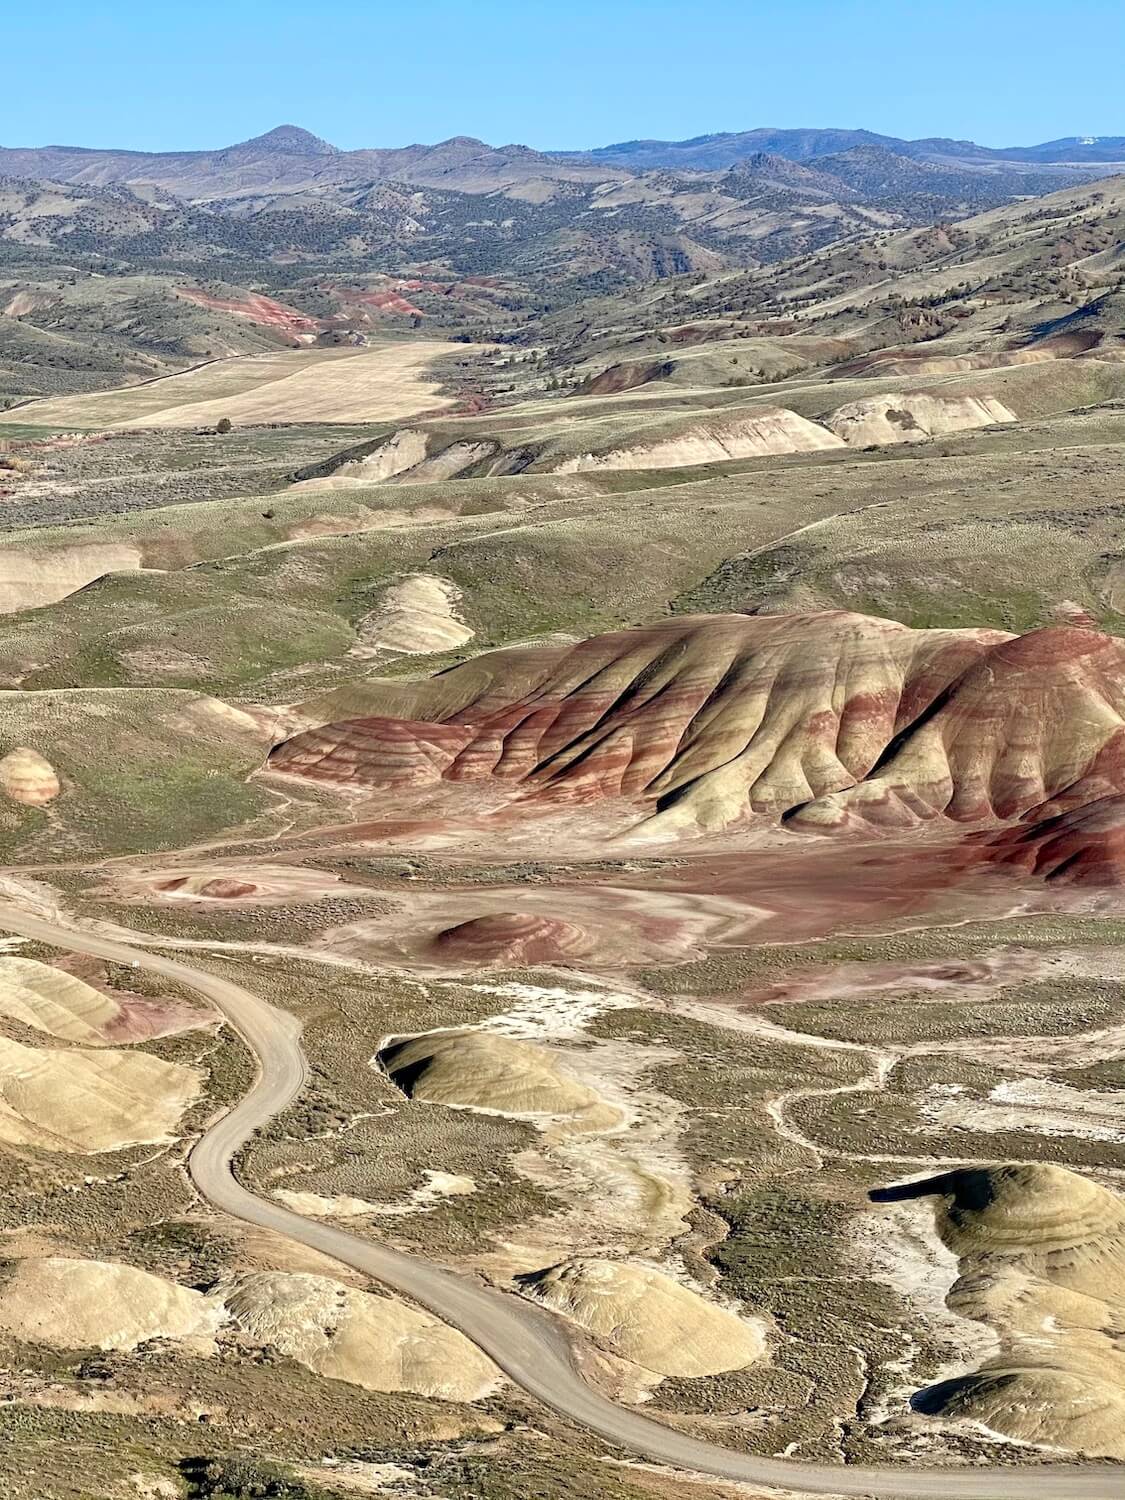 The Painted Hills Oregon shine in the bright sun from this viewpoint high above on the ridge next door.  Below is a gravel road winding through the mounds of soil that take on yellow, green and red hues.  The main feature looks like toes with red stripes running through them.  The rolling hills in the background lead to a blue sky above.  